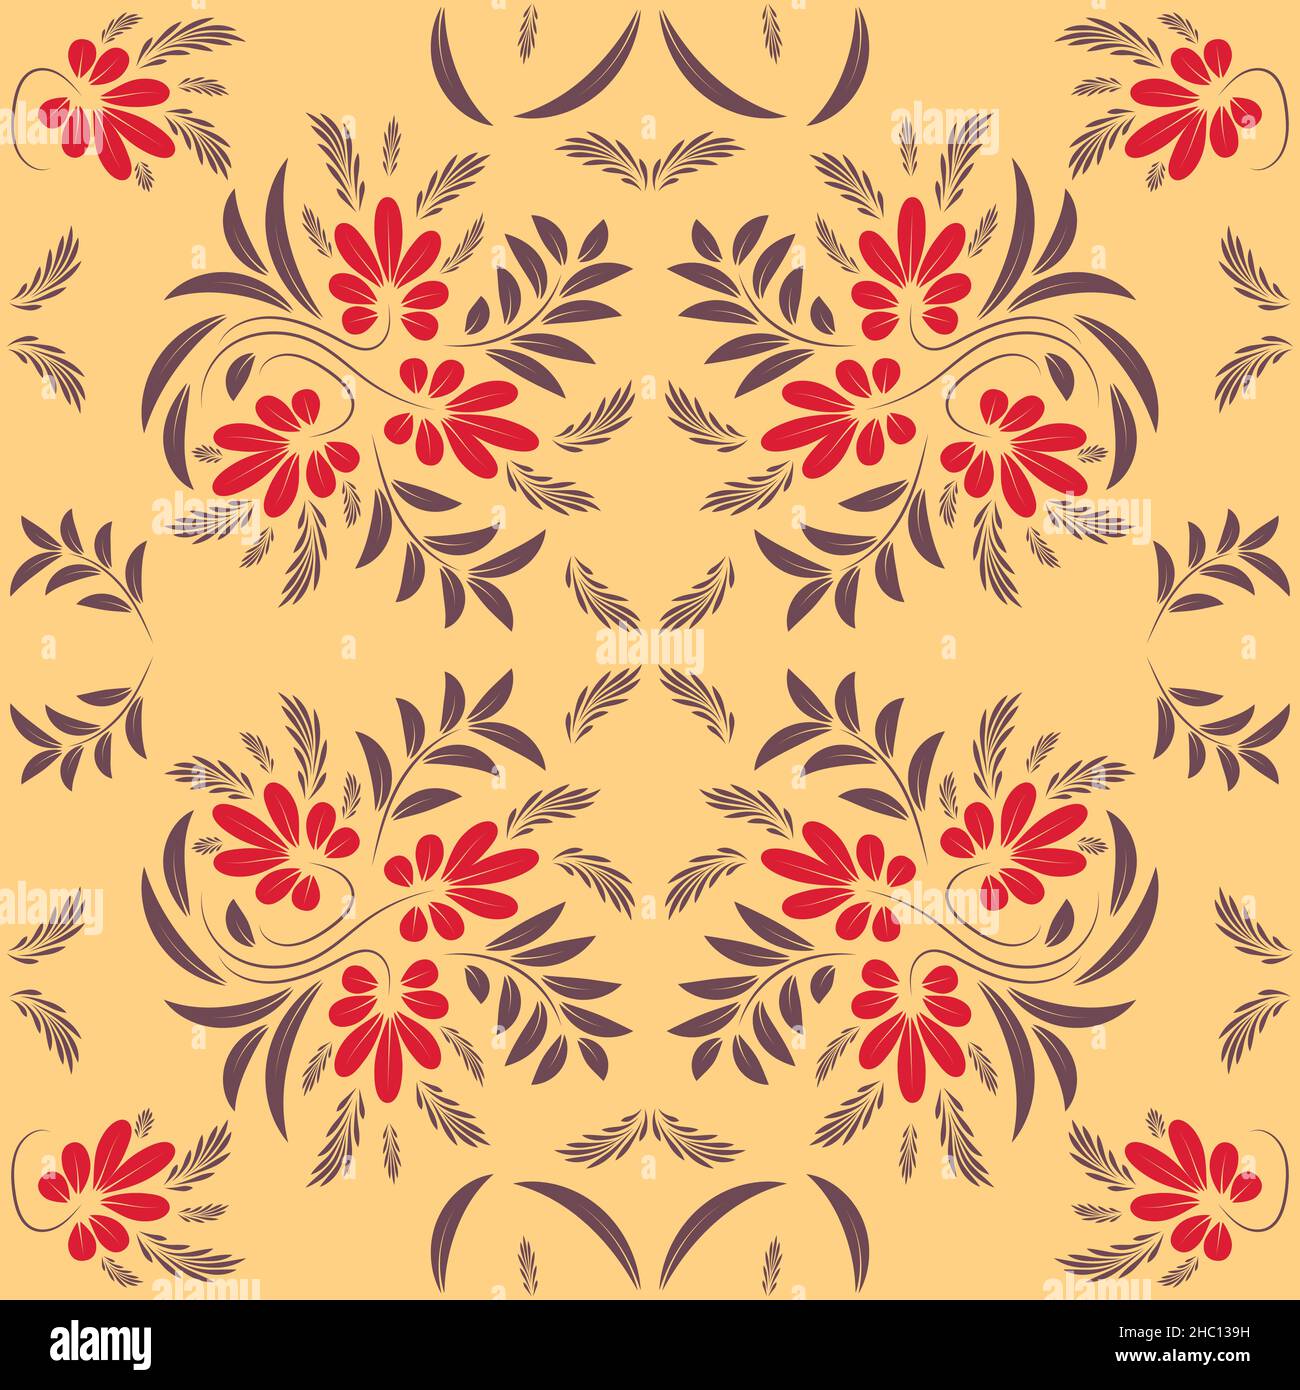 Floral pattern paisley style Paisley print Stock Vector